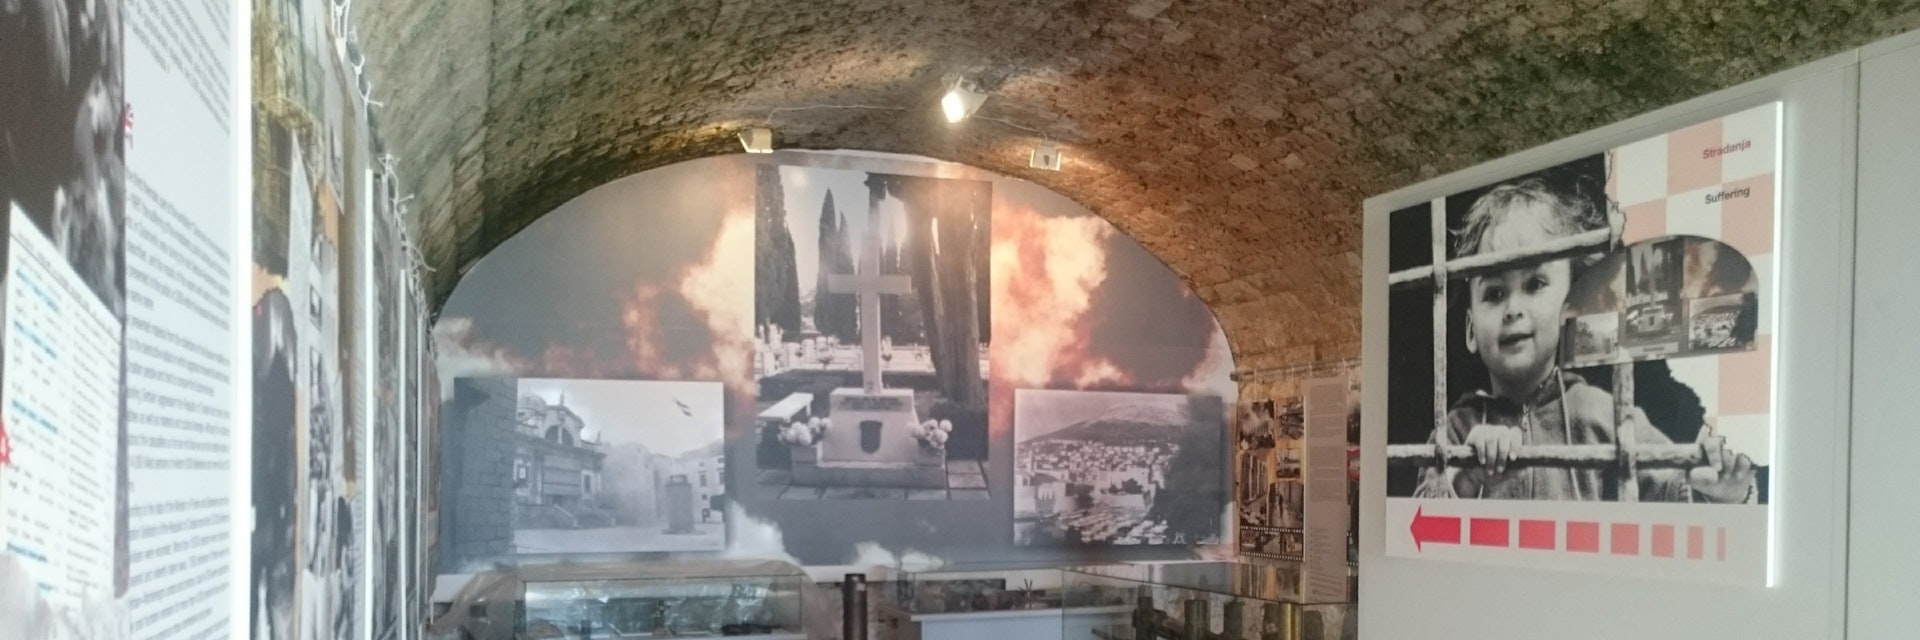 One of the Dubrovnik during the Homeland War museum displays